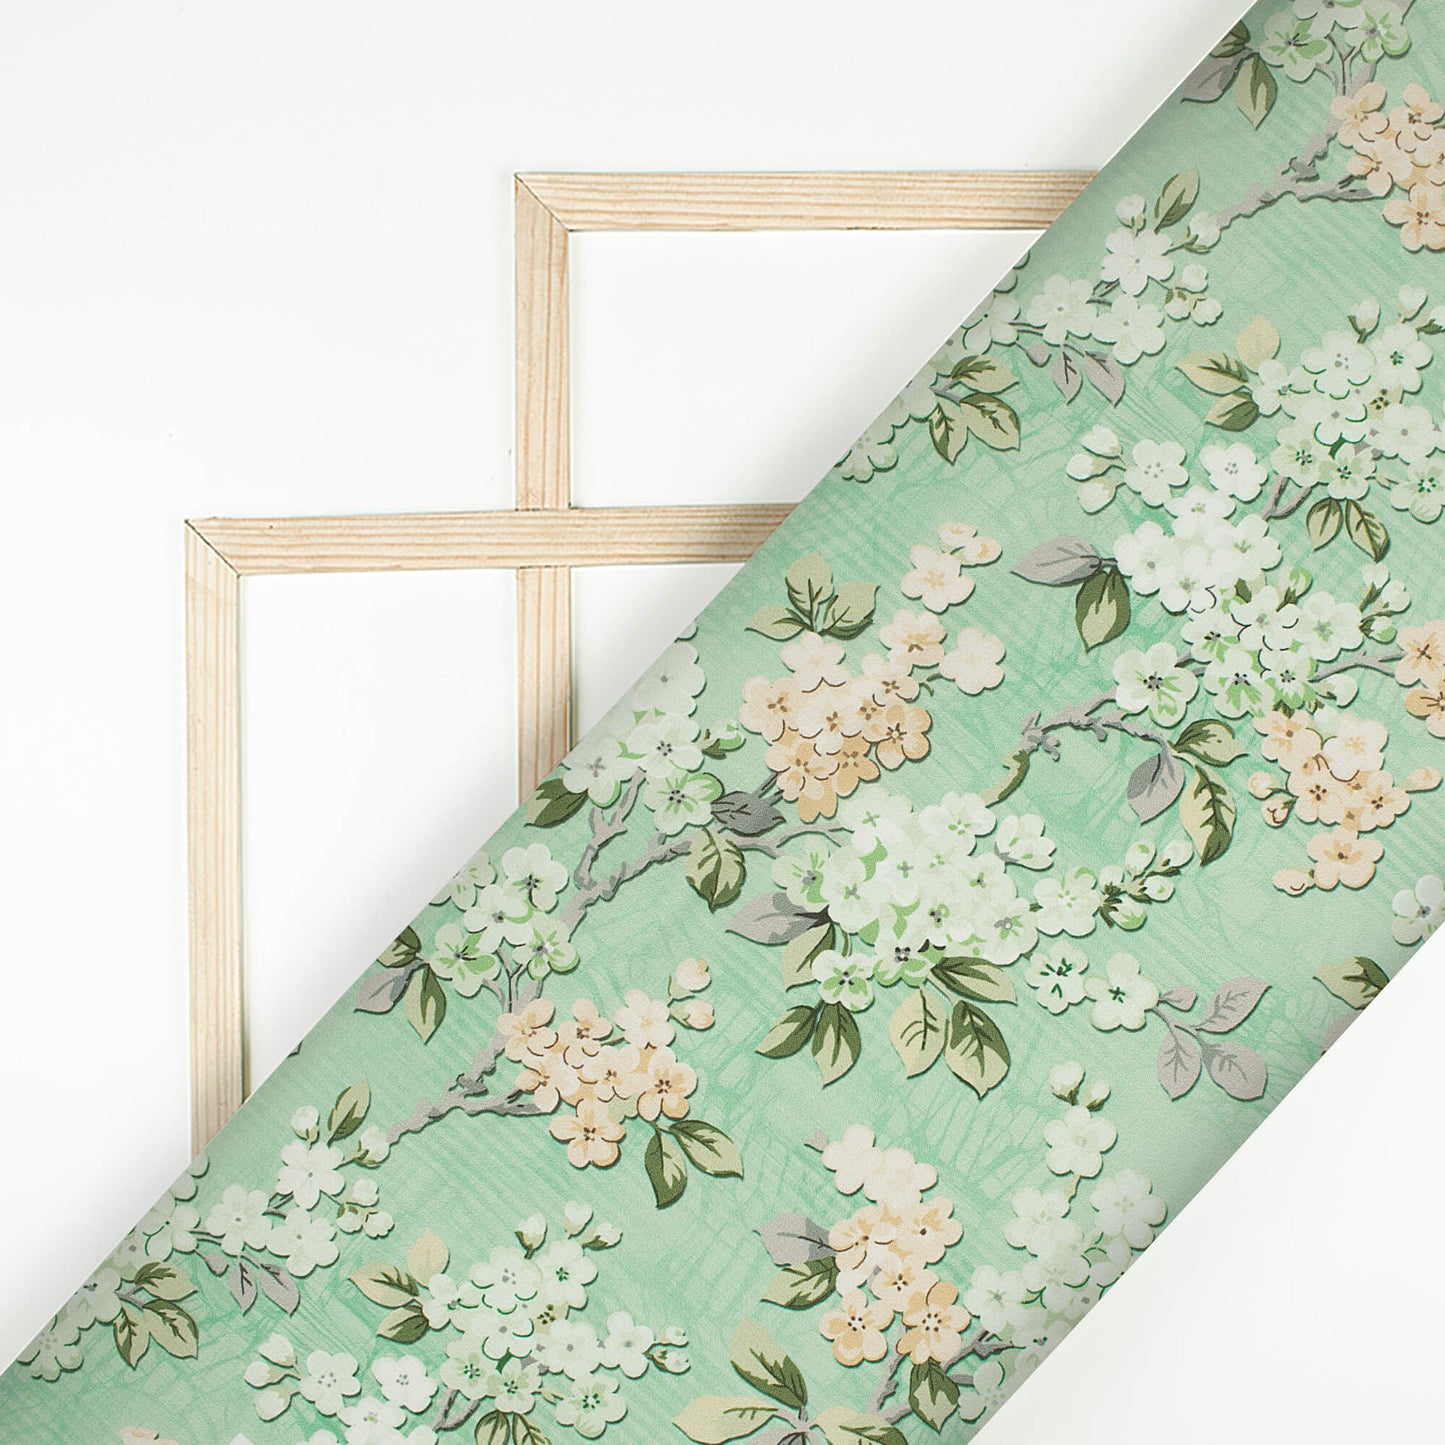 Tea Green And Pastel Peach Floral Pattern Digital Print Poly Cambric Fabric